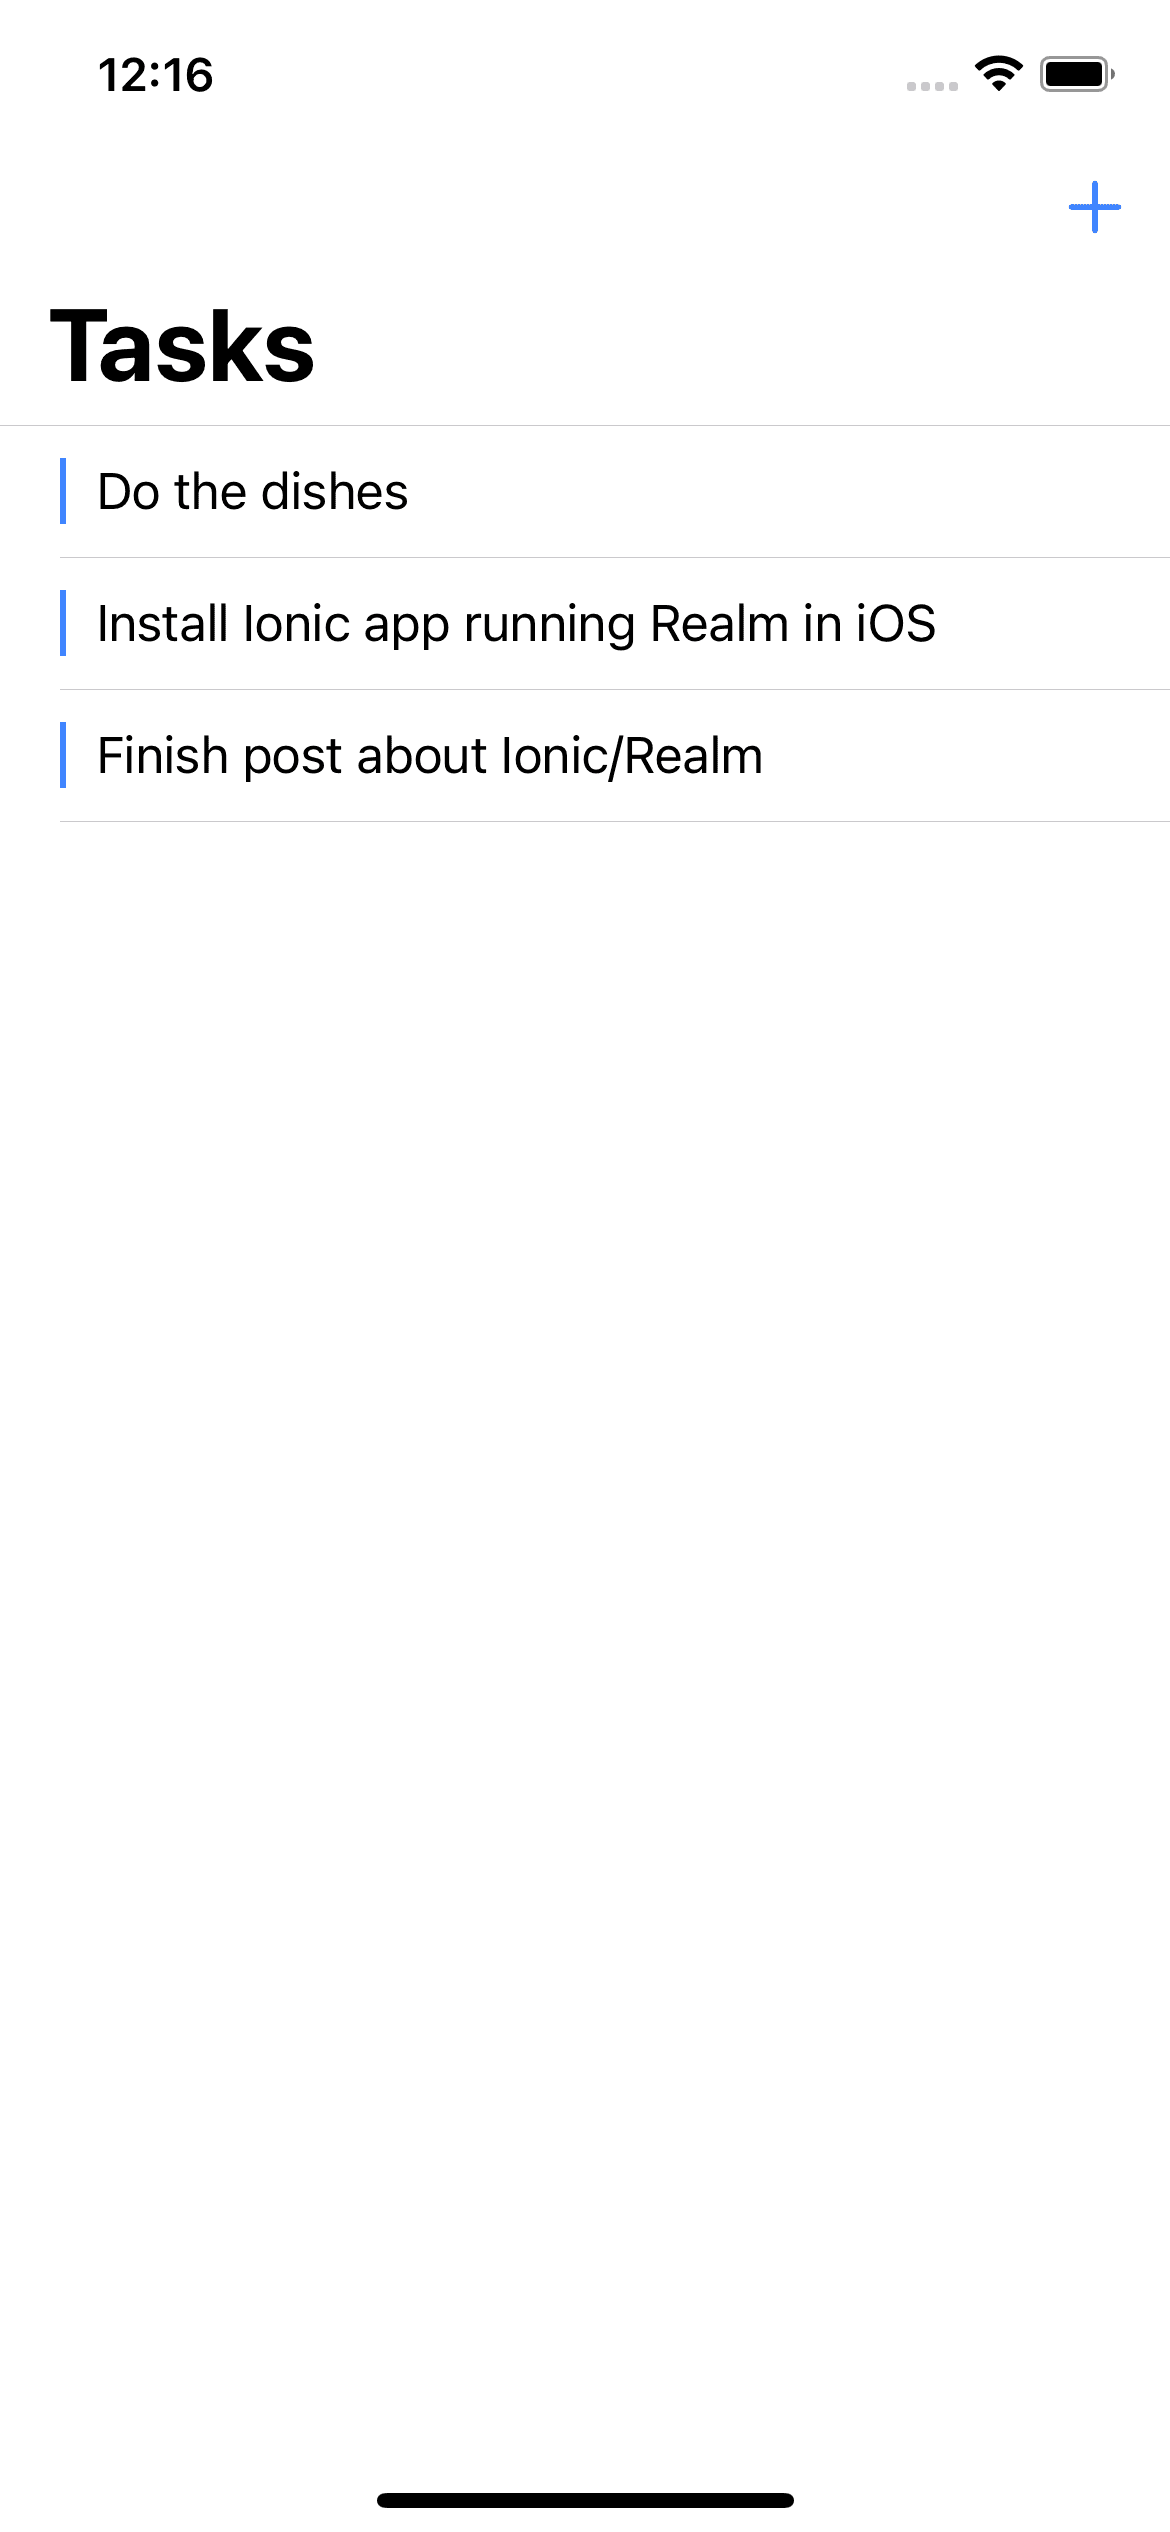 Tasks already entered in the iOS app, one for “Do the dishes”, another for “Finish post about Ionic / Realm” and last one “Install Ionic app running Realm in iOS”